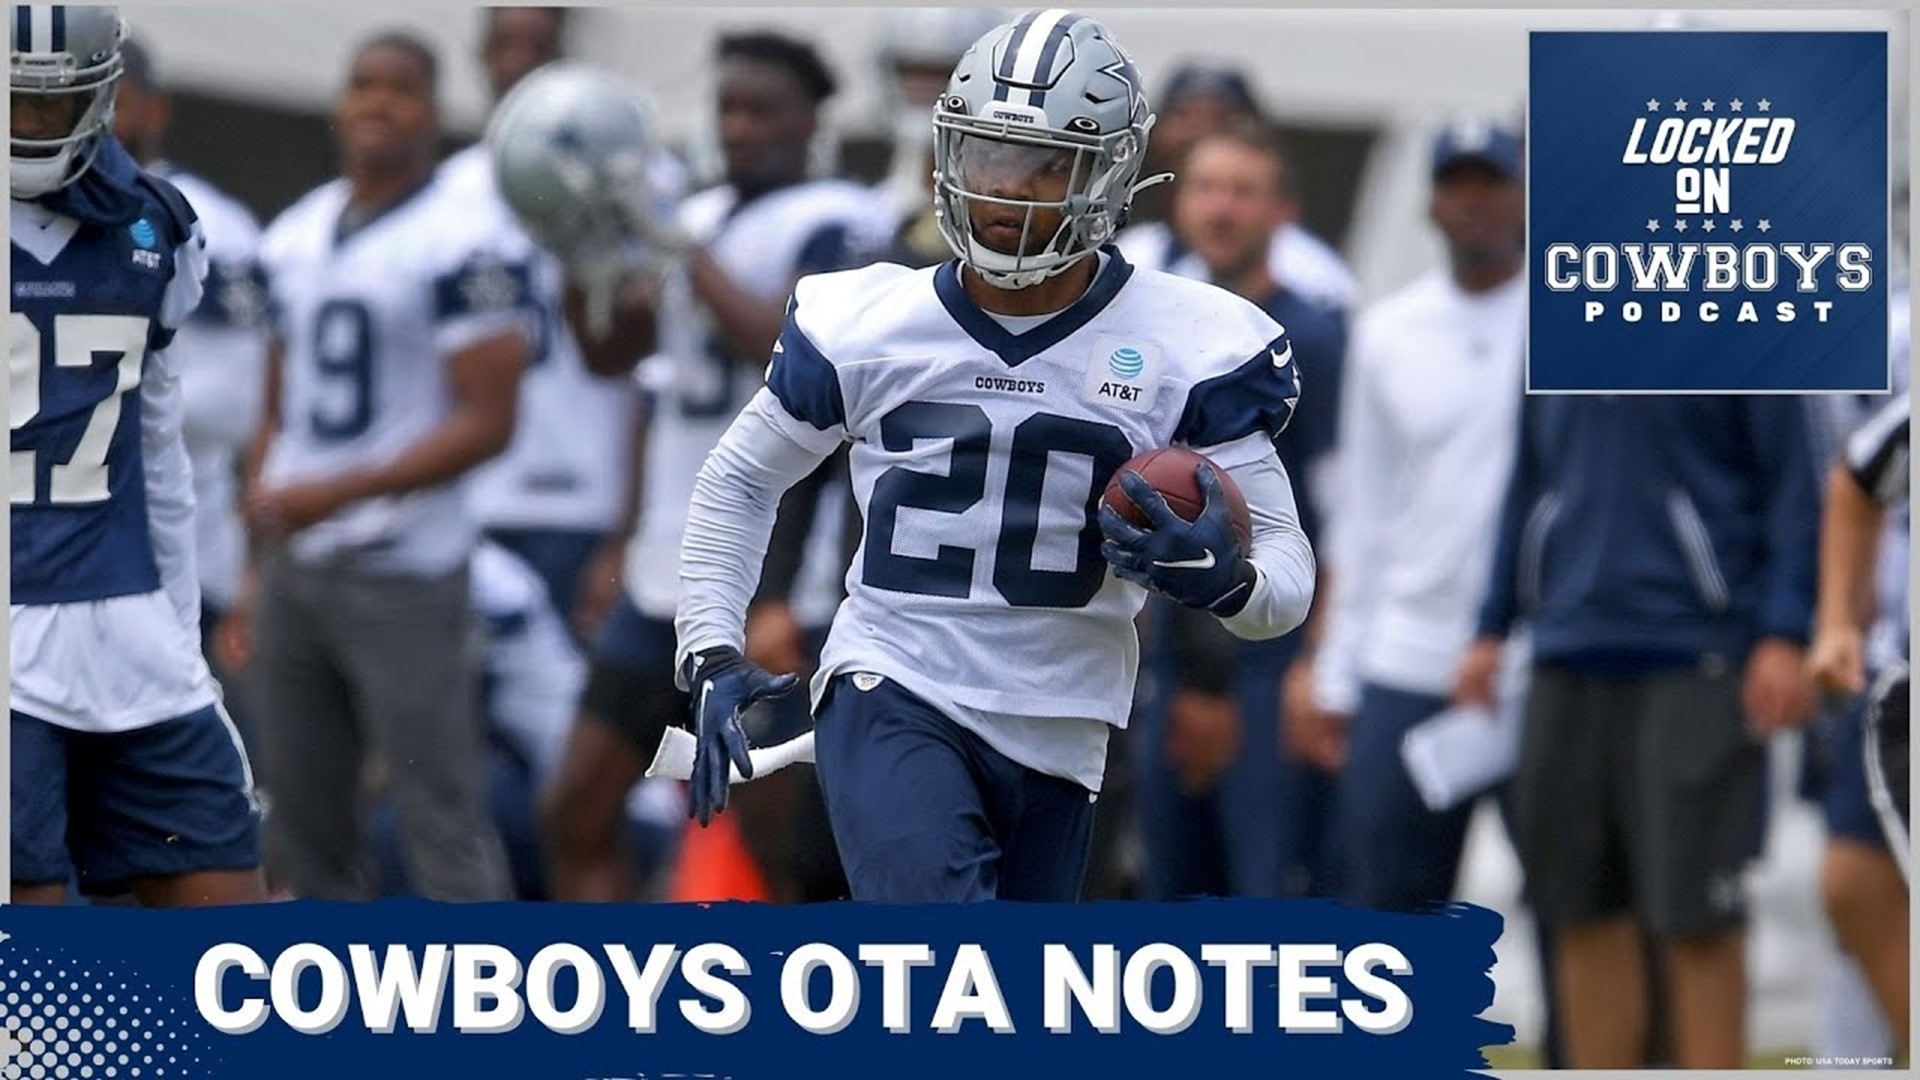 Marcus Mosher and Landon McCool discuss the latest news and notes from the Dallas Cowboys OTA practice on Thursday.